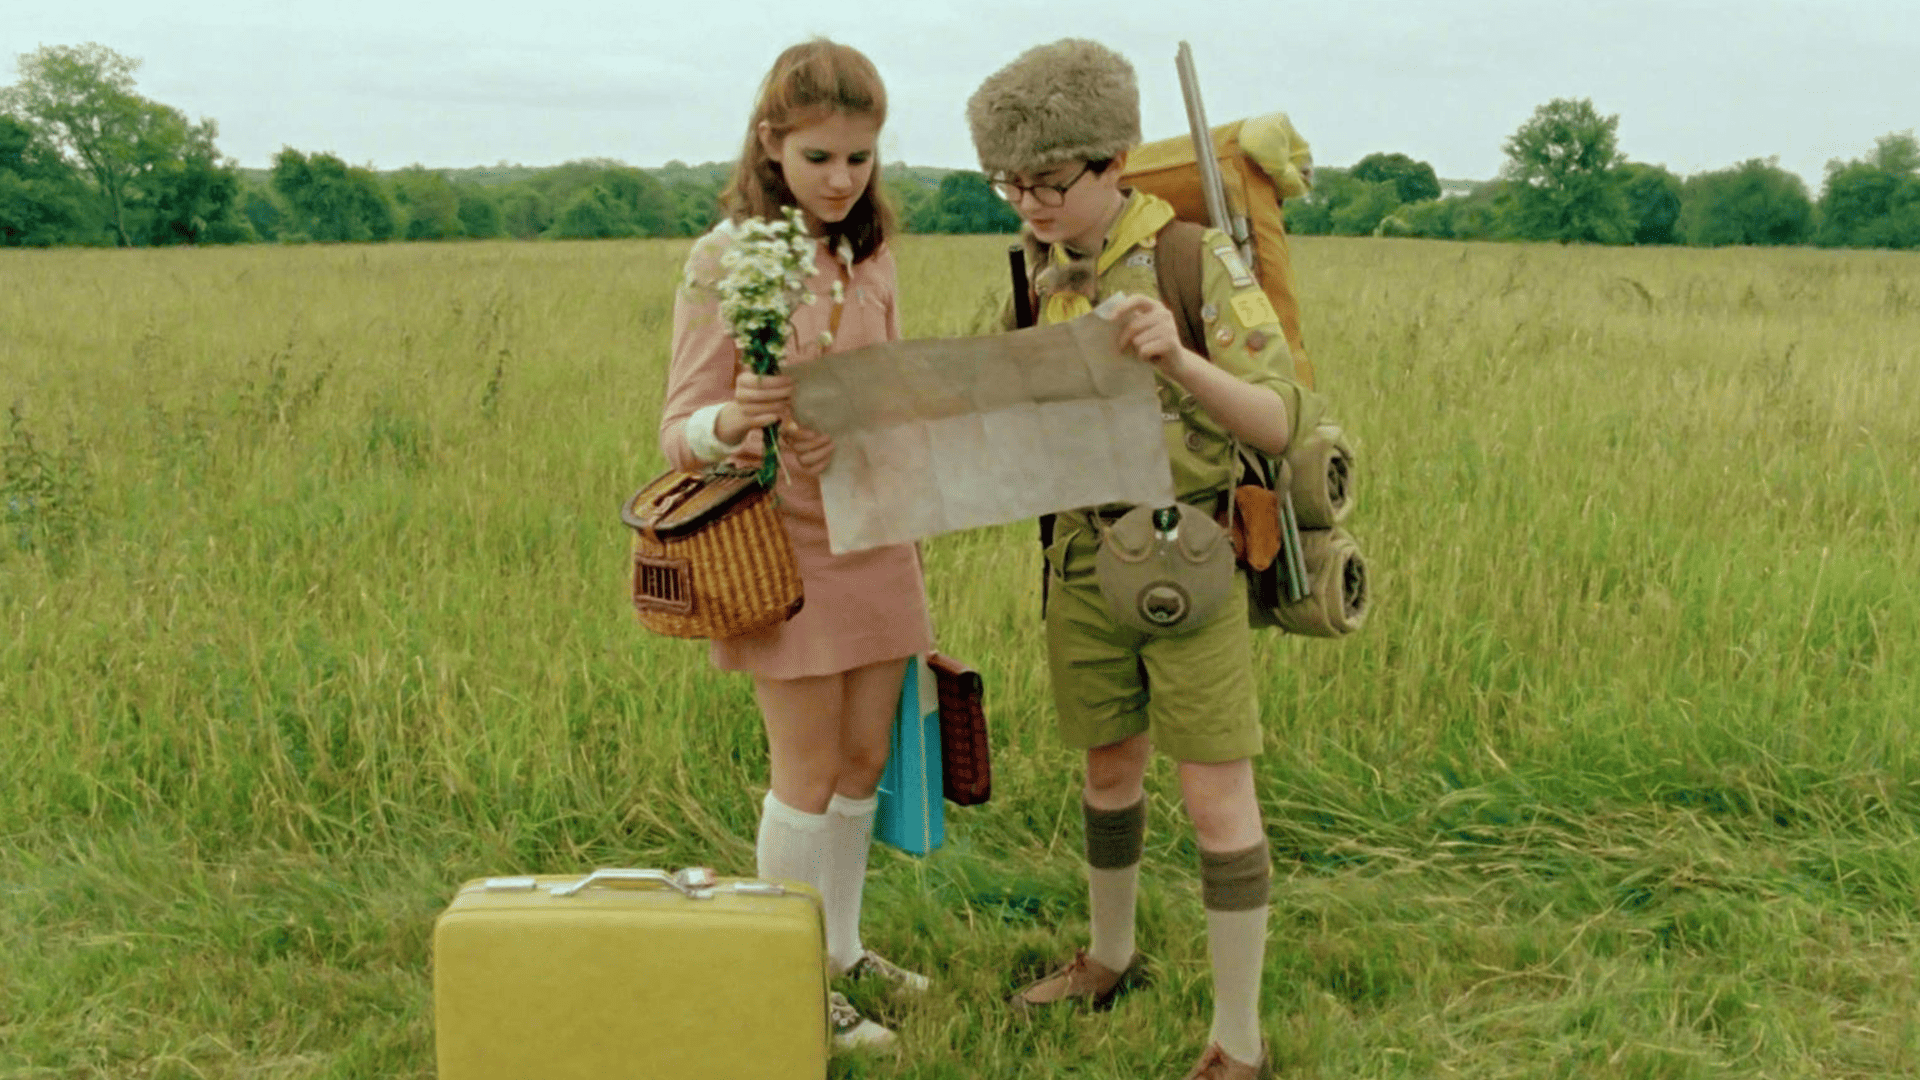 Kara Hayward and Jared Gilman stand in a field and look at a map in this image from Indian Paintbrush